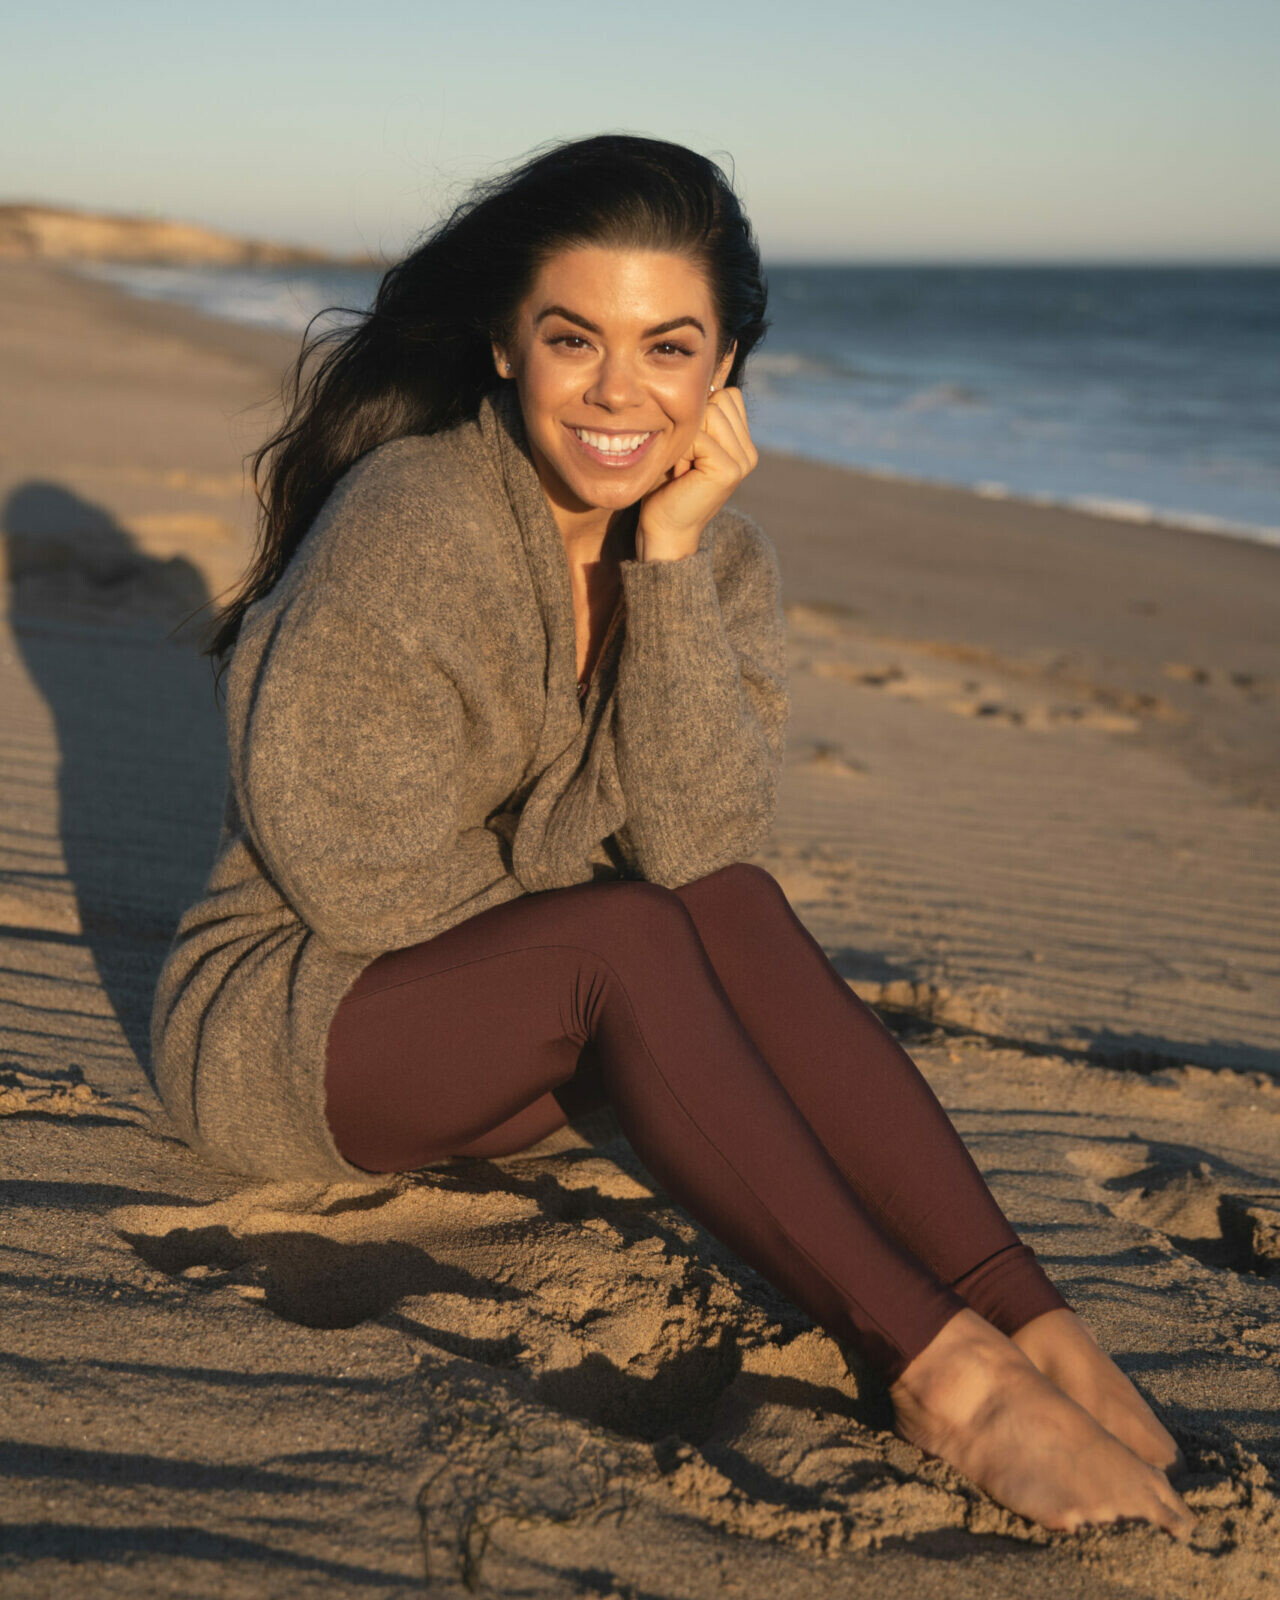 Gabby Sansosti sitting on the beach oceanside relaxed and joyful with a big smile during sunset